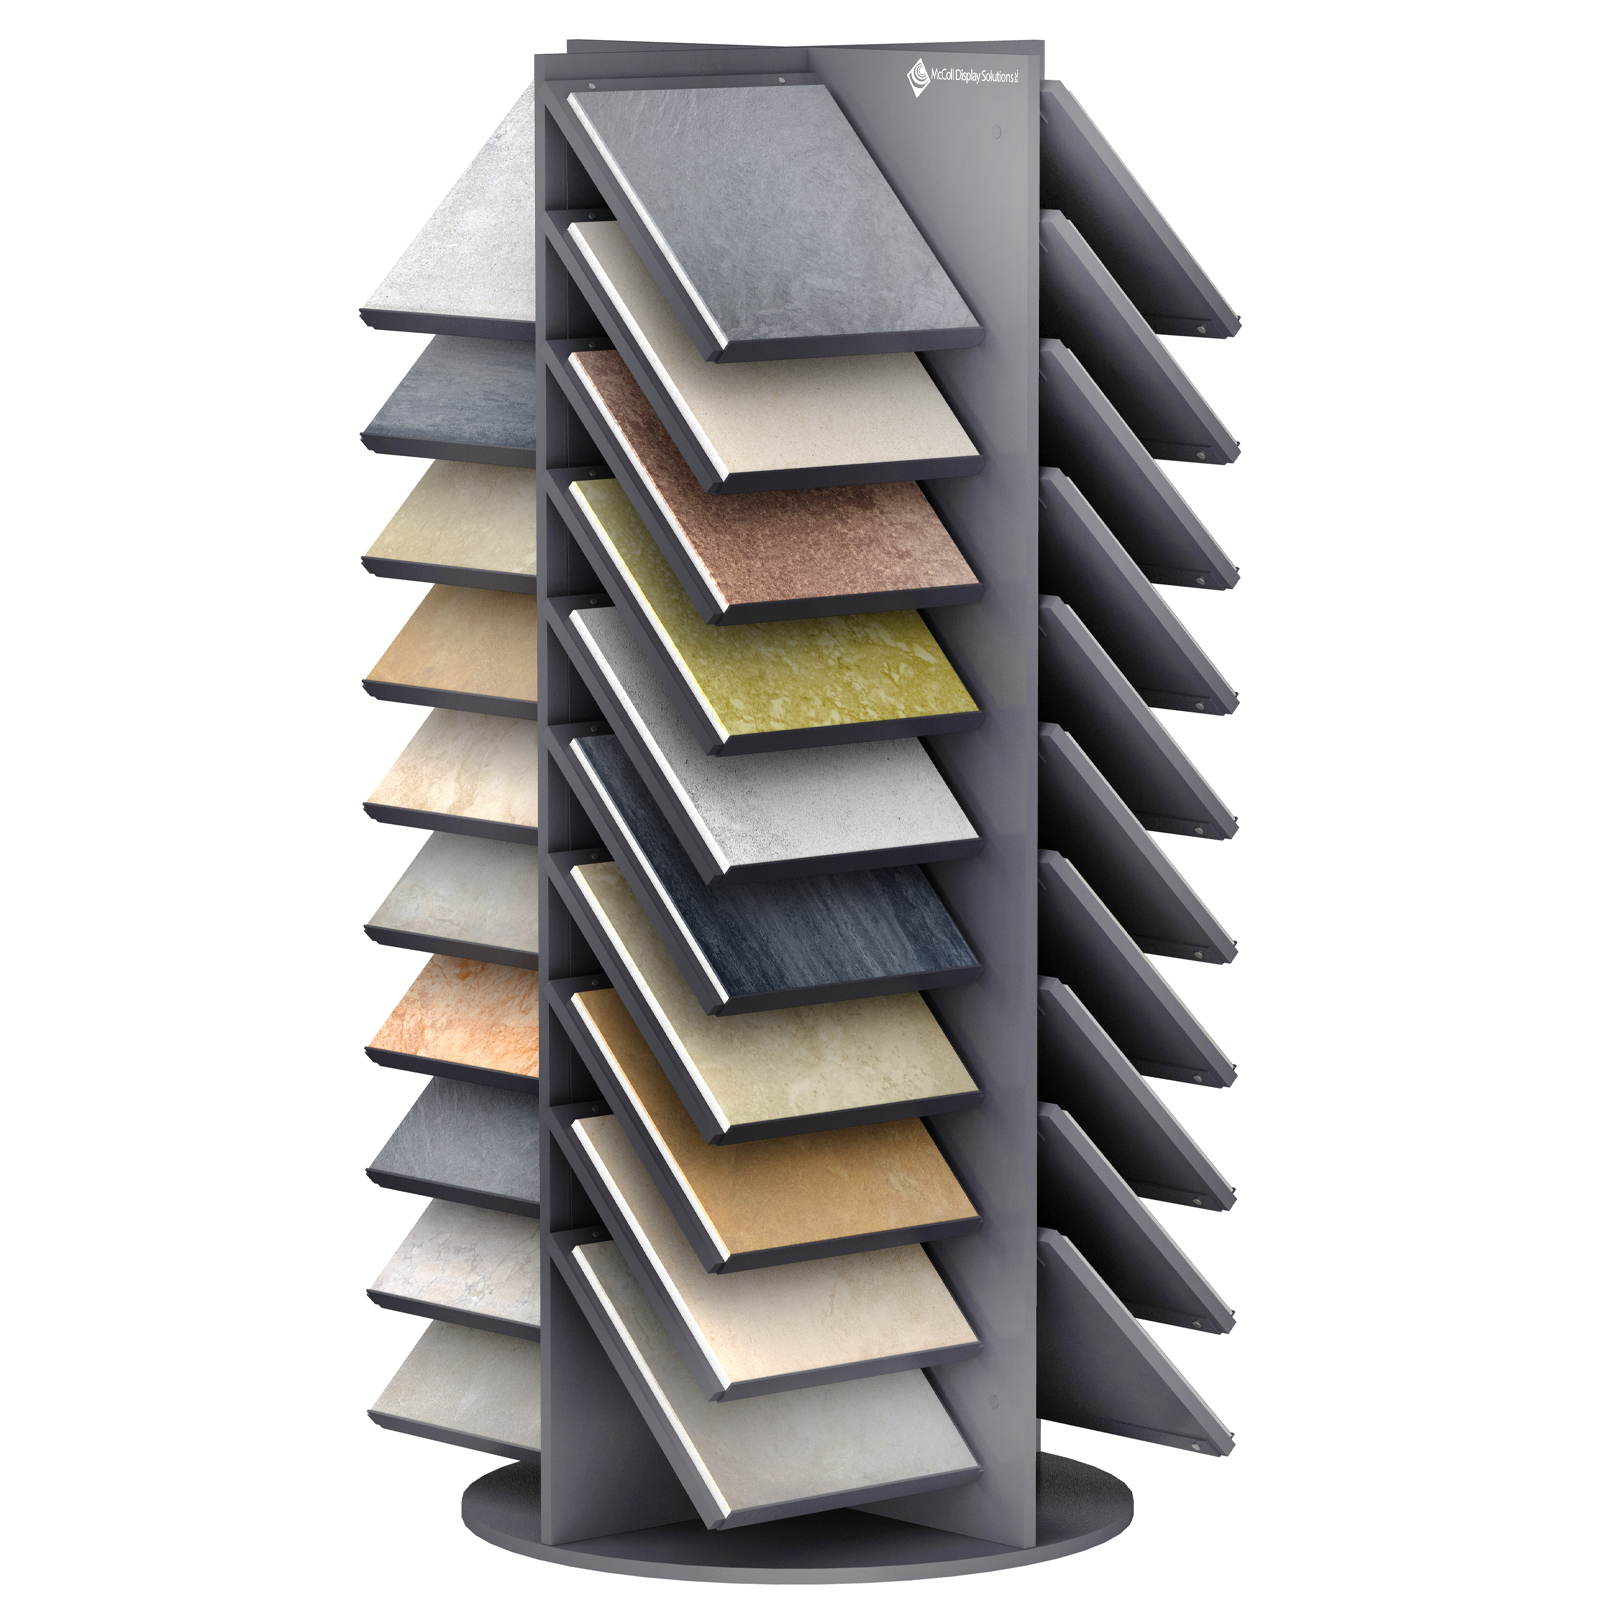 Display Tile Stone Marble Product Samples with this Rotating Tower Shelf System